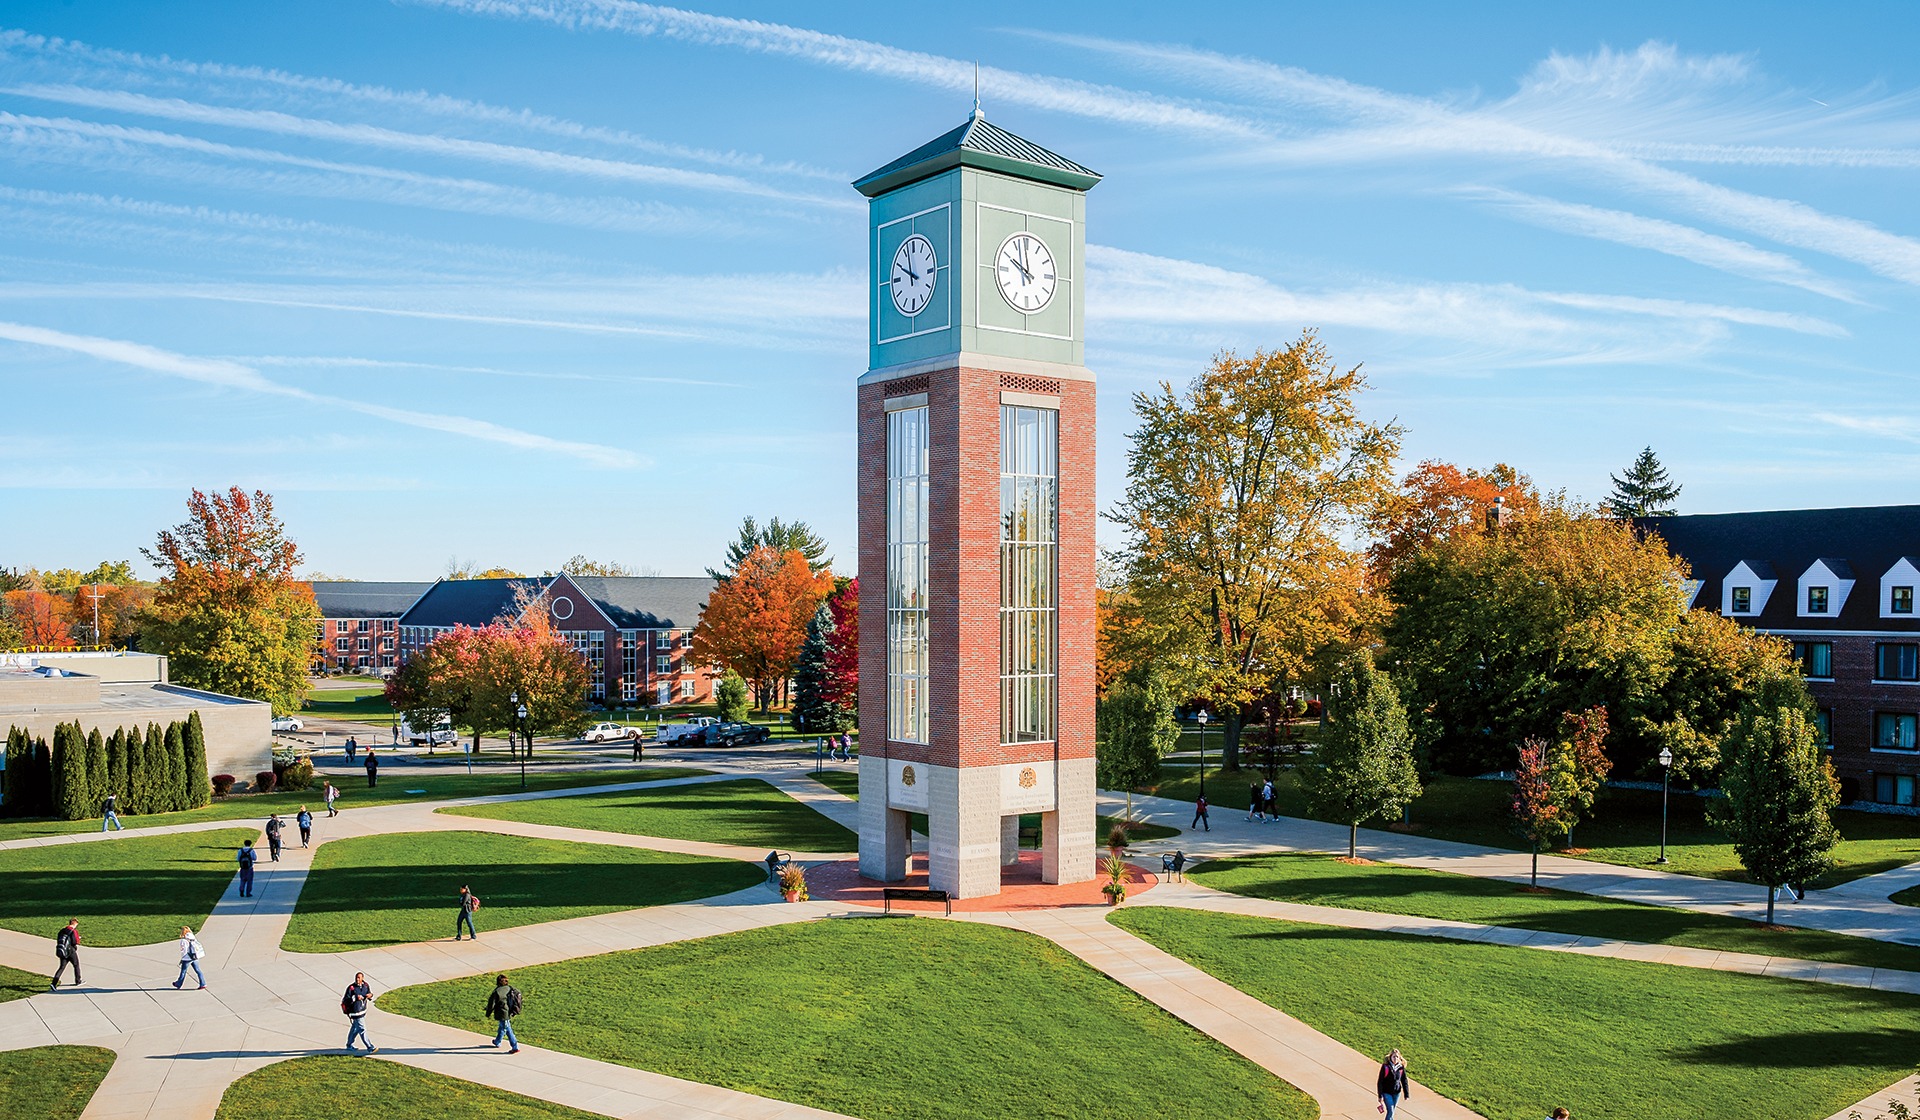 Aerial photo of campus plaza with clocktower